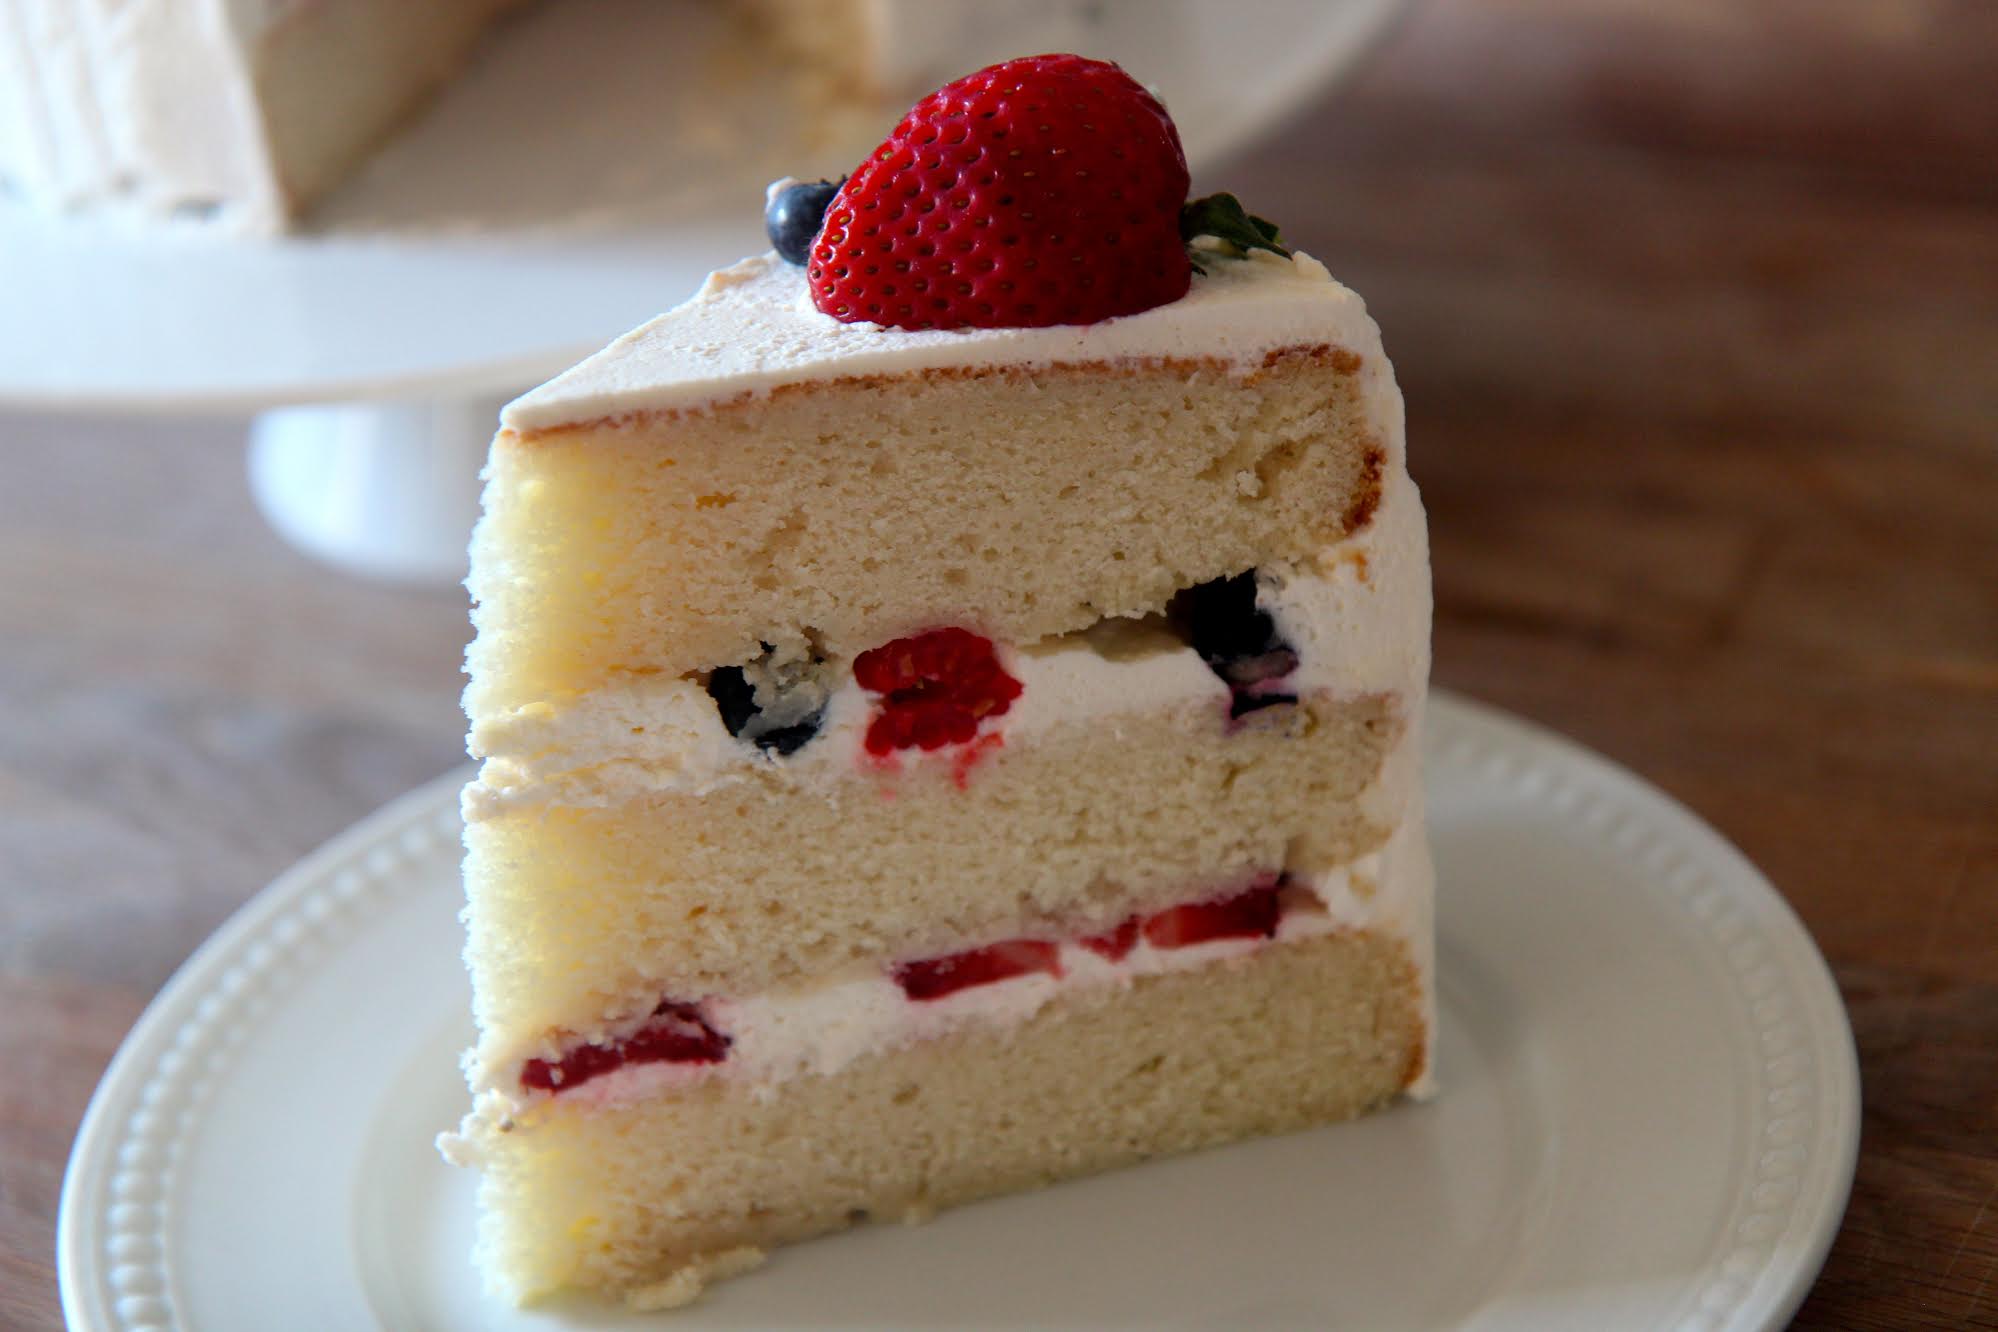 Three layers of yellow cake with a sweet vanilla frosting and filled with raspberries, strawberries, and blueberries